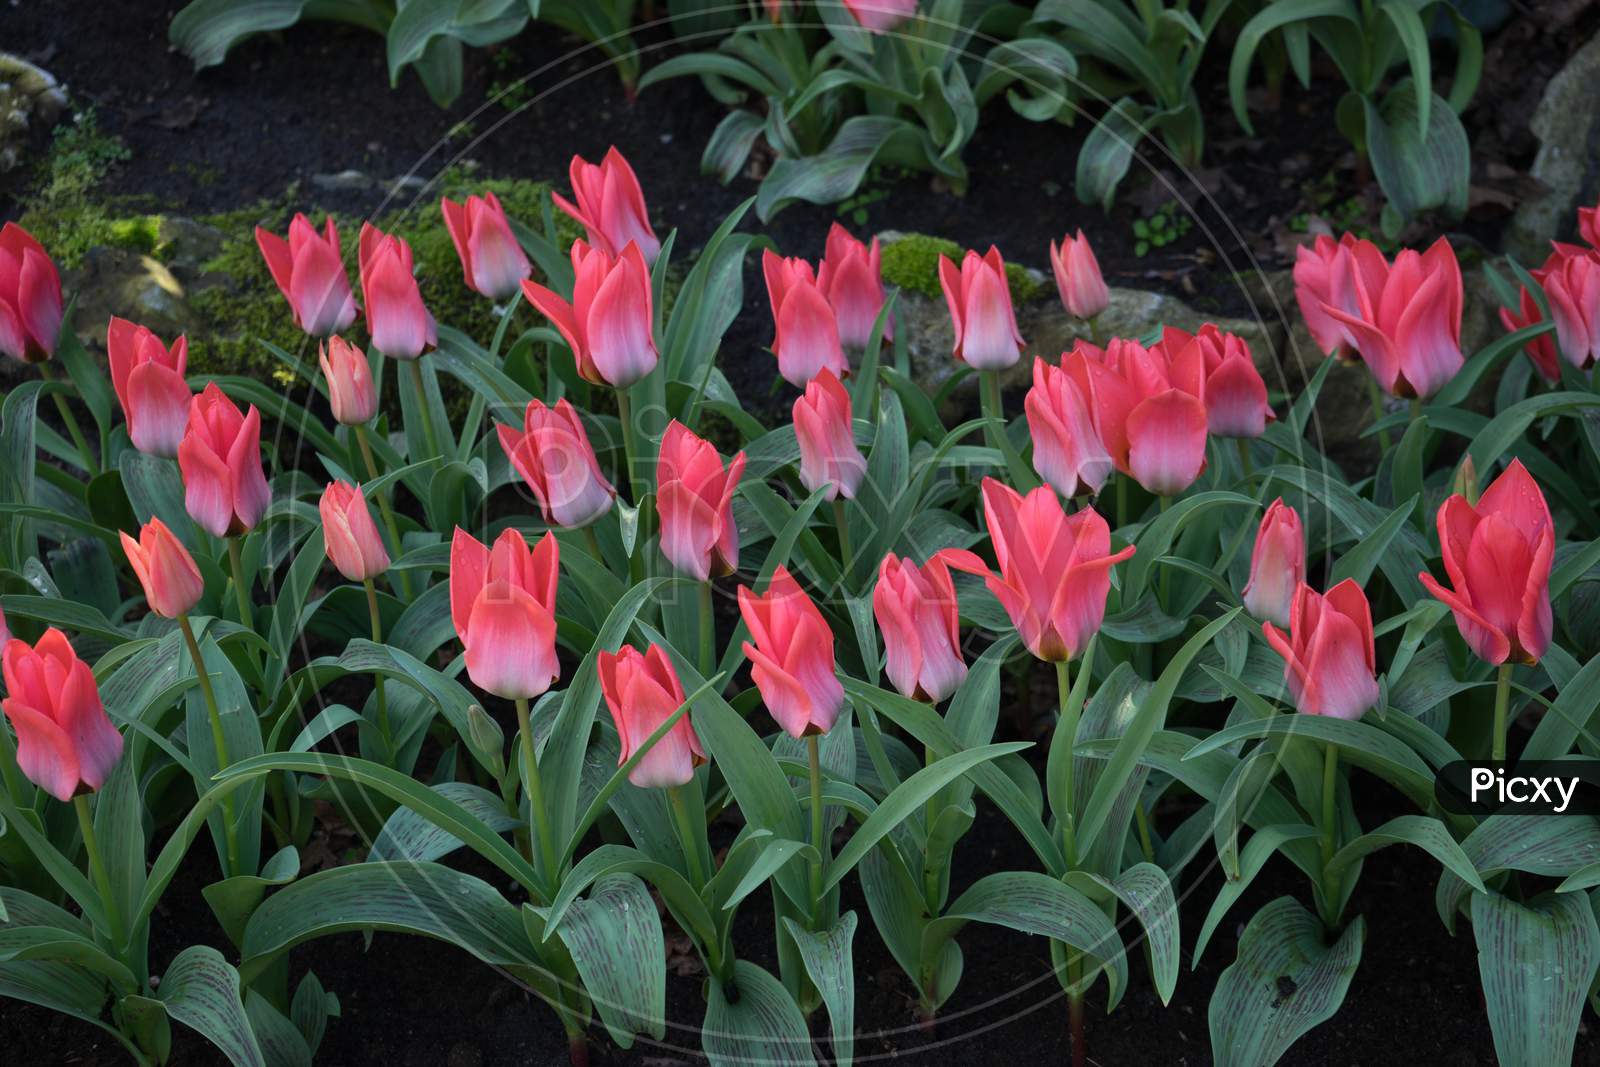 Pink And Rose Colored Tulips In A Garden In Lisse, Netherlands, Europe